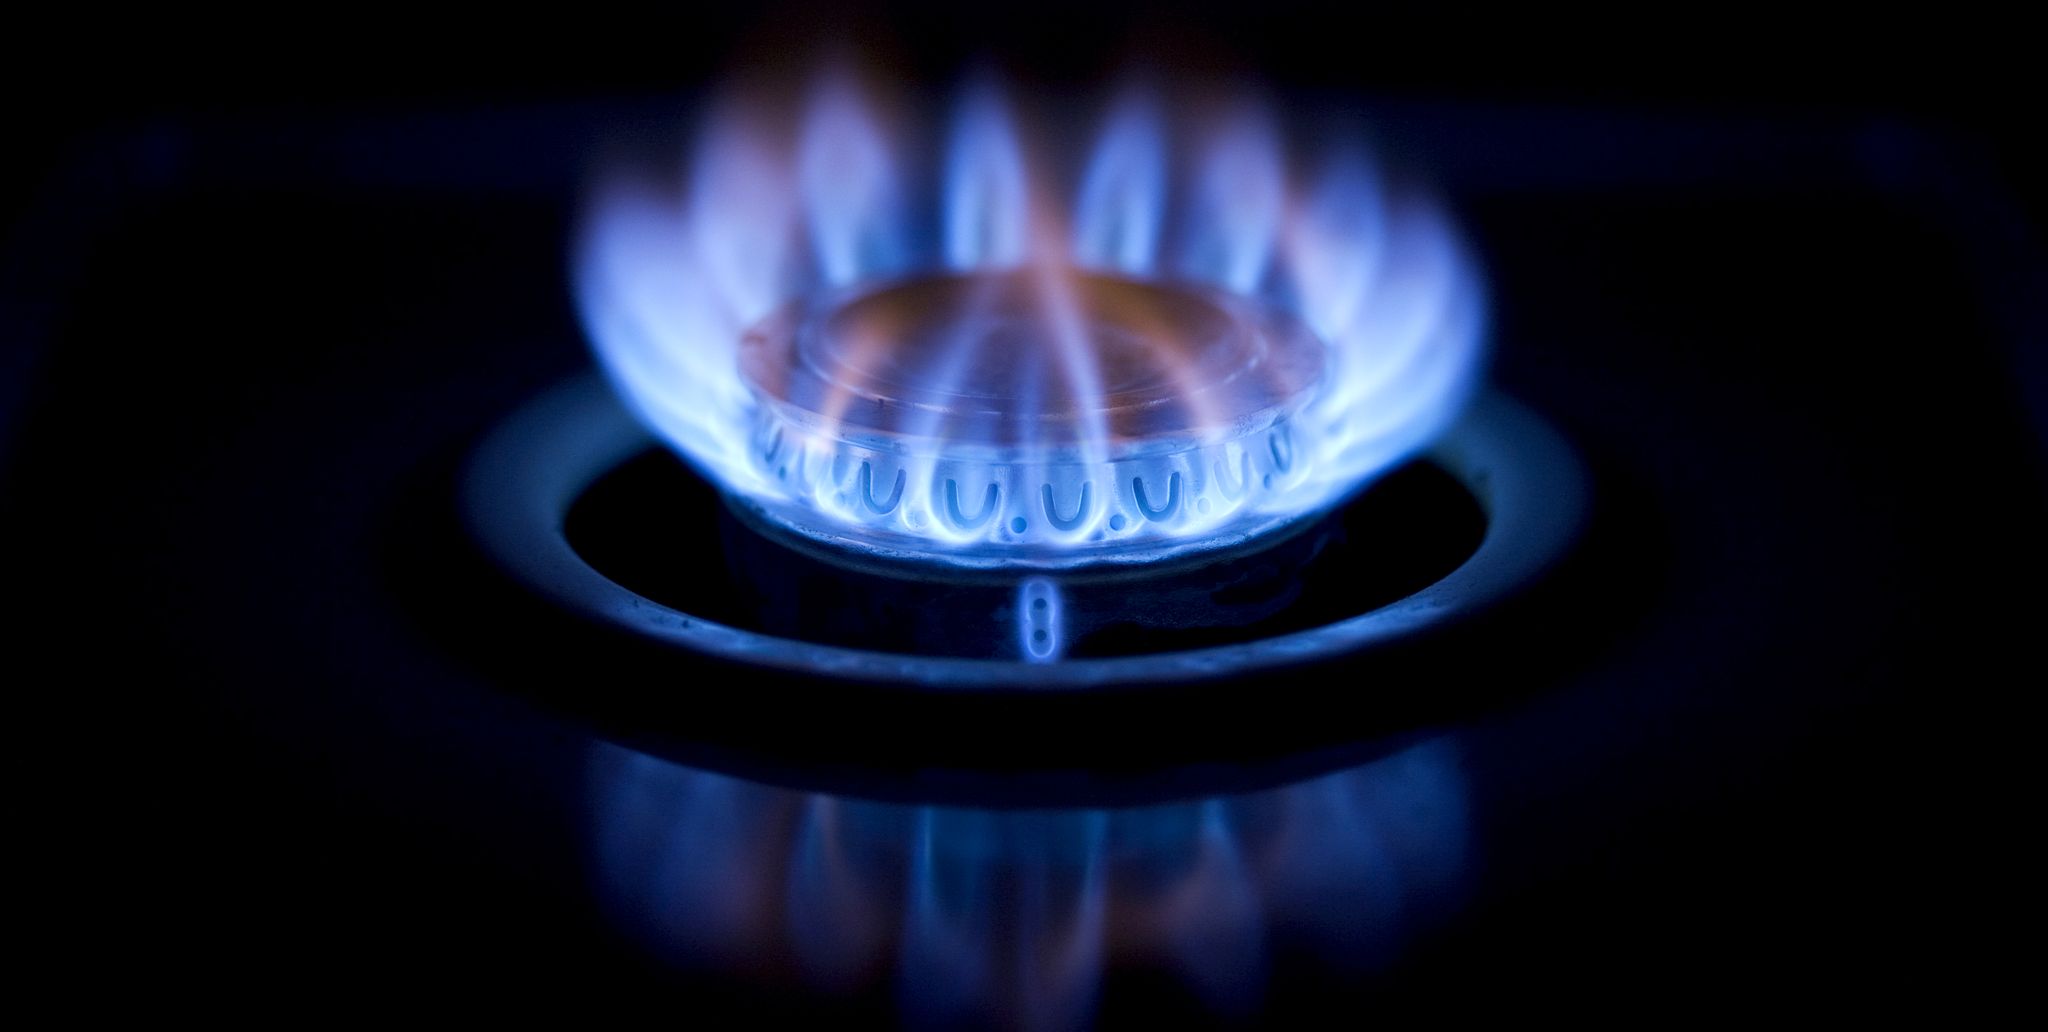 Burning gas oven - know how to spot a carbon monoxide leak and keep your appliances safe